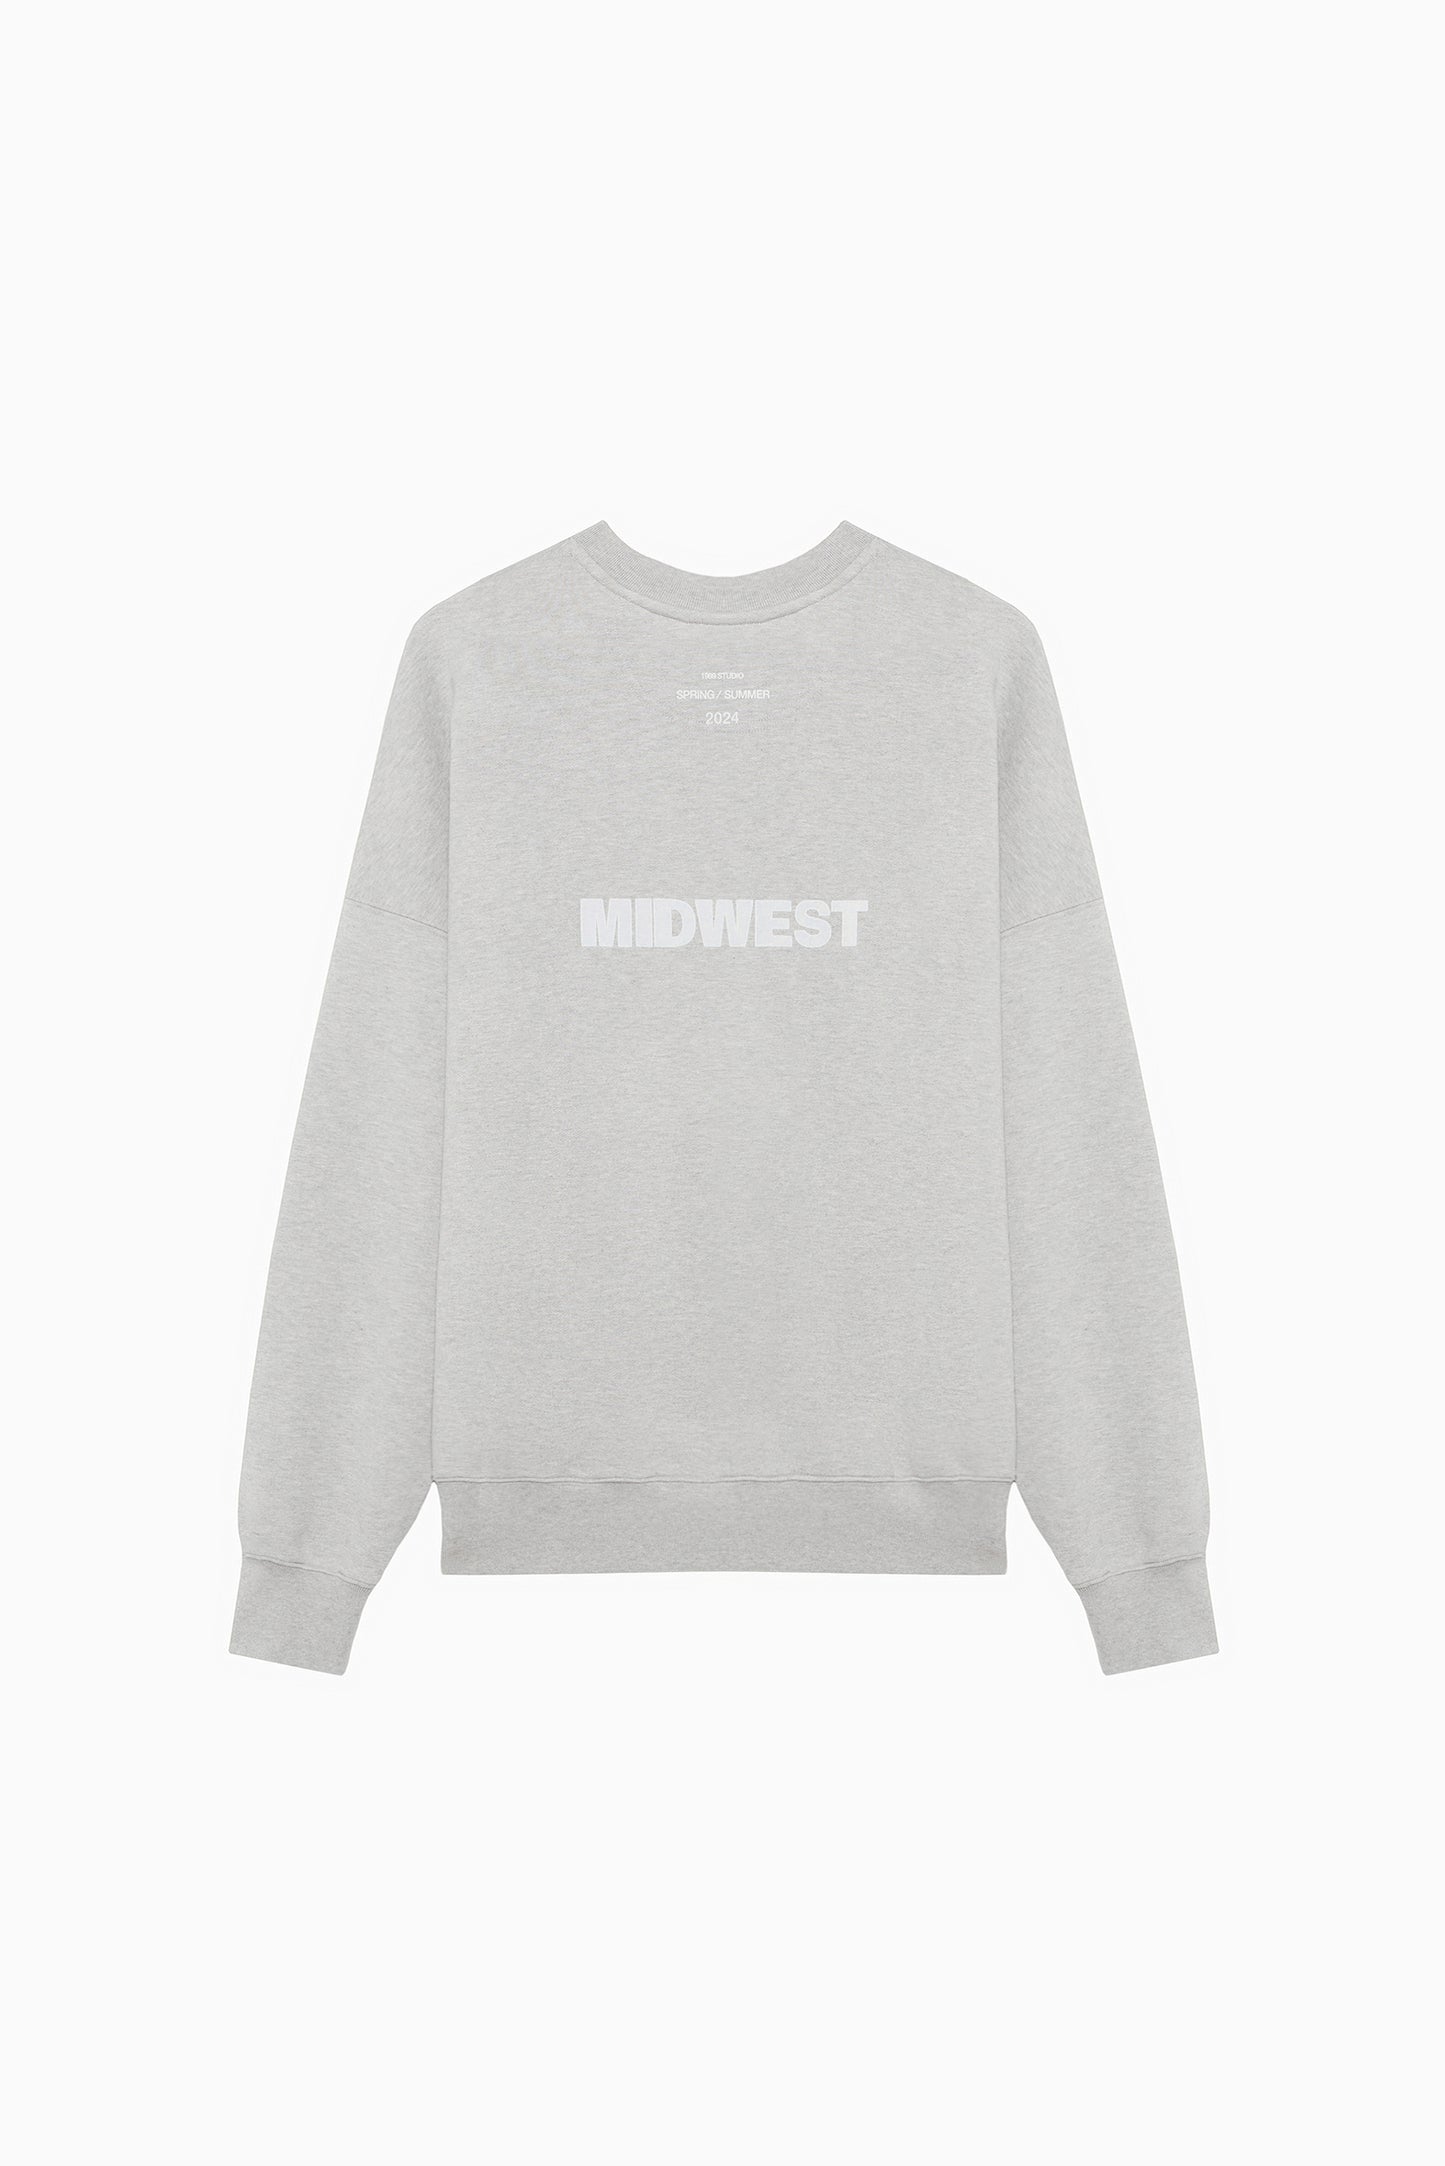 Man's Midwest Relaxed Sweatshirt